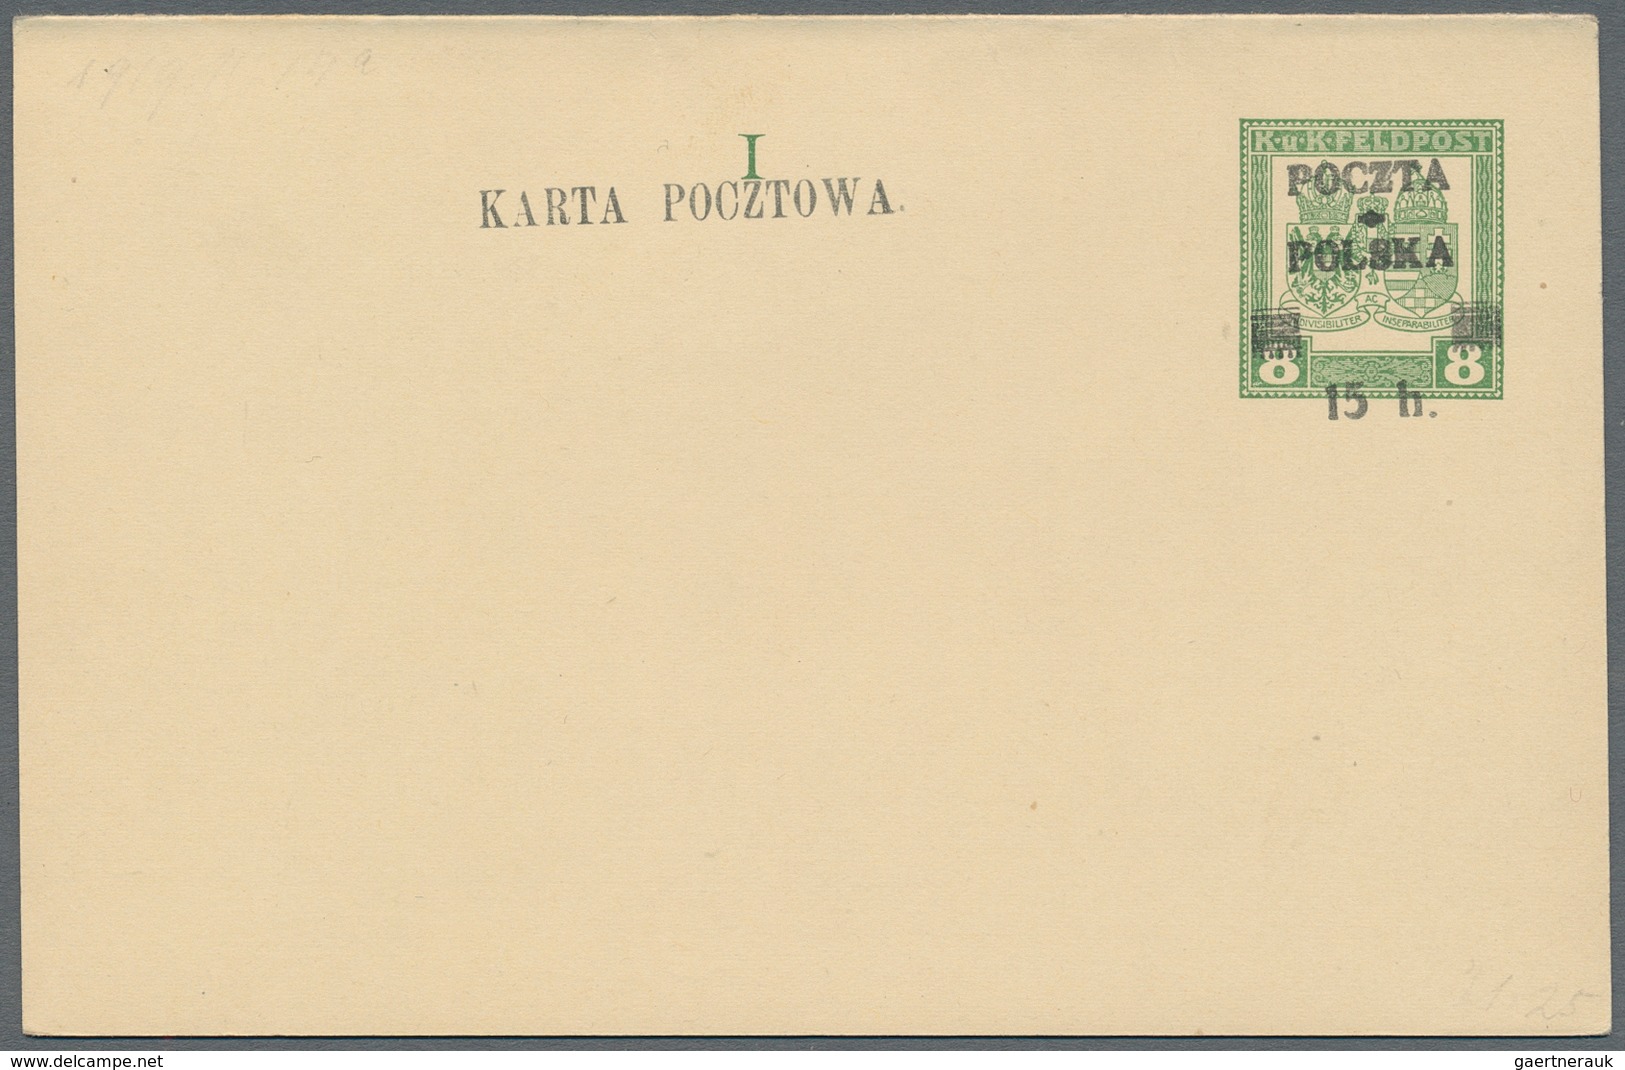 Polen - Ganzsachen: 1919 Unused And Revalued Postal Stationery Card, Original Card From Austria FP 4 - Stamped Stationery